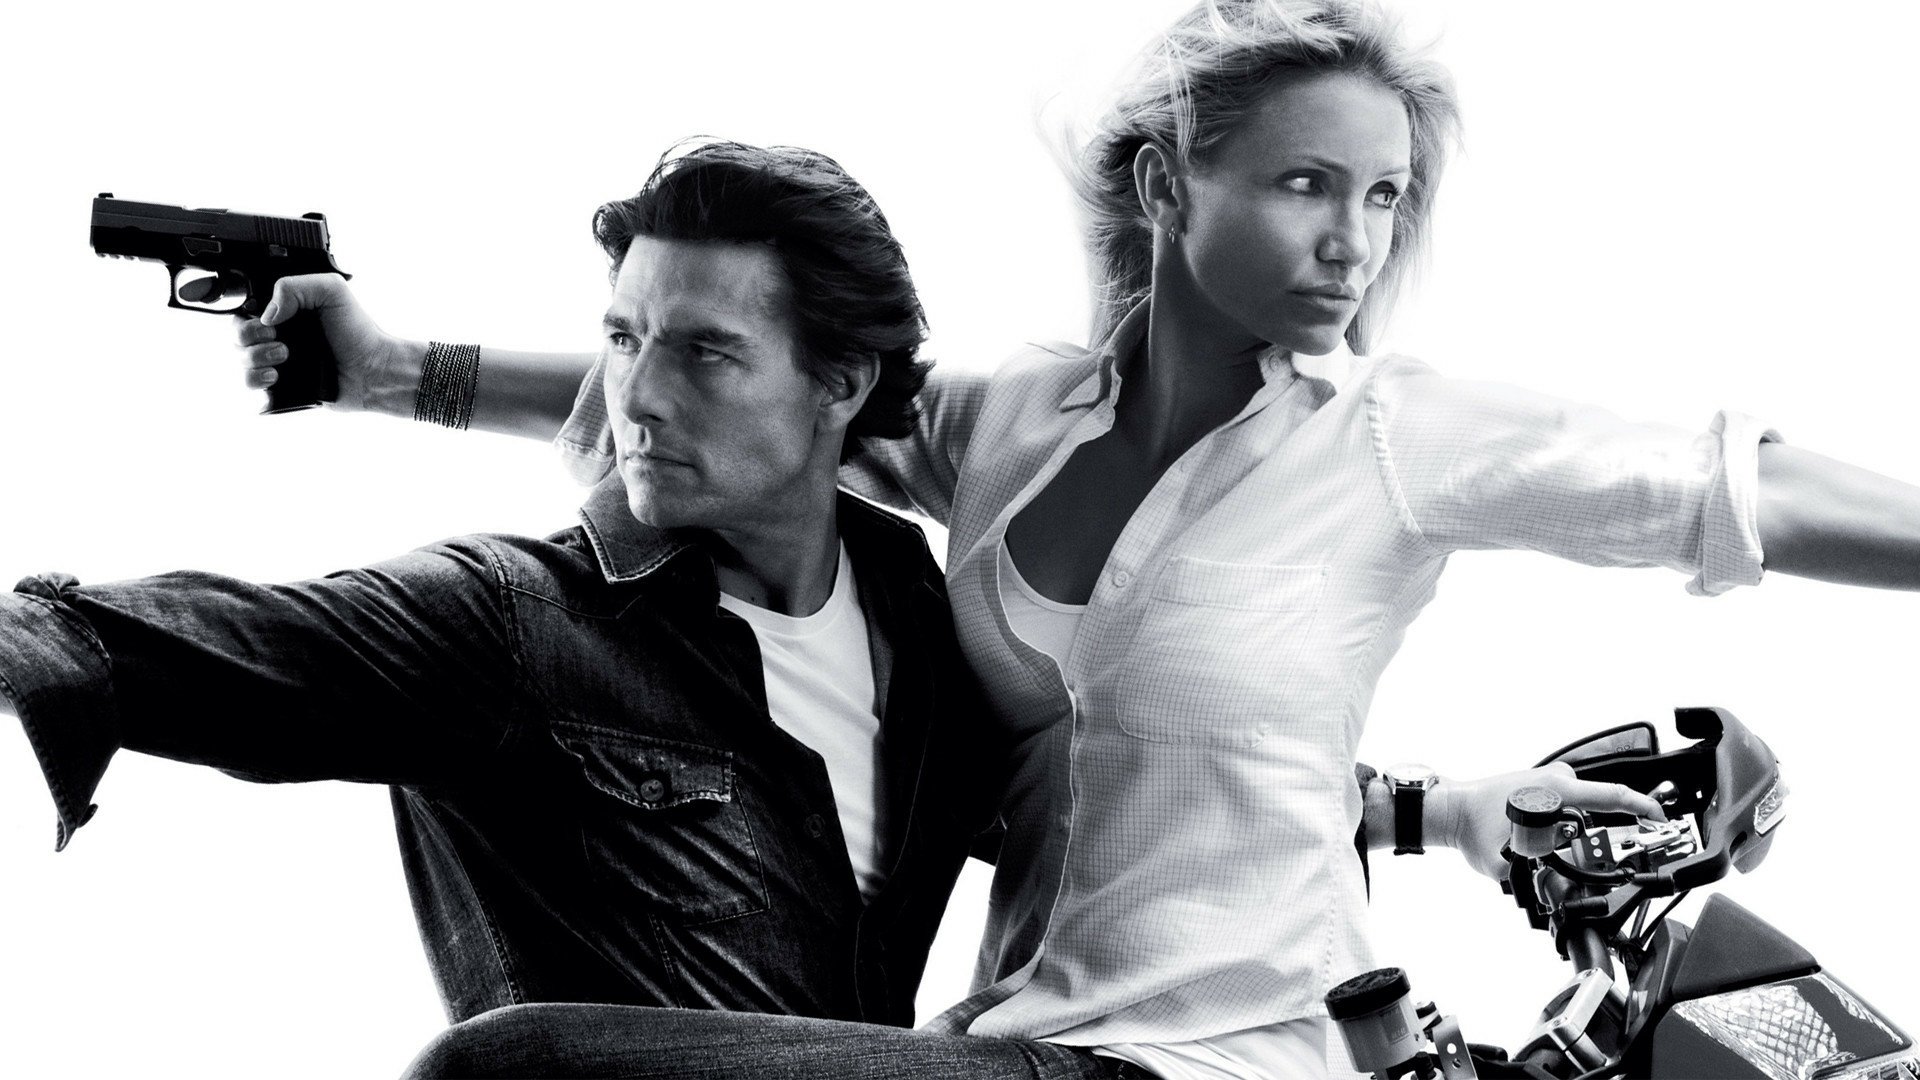 tom cruise movie knight and day